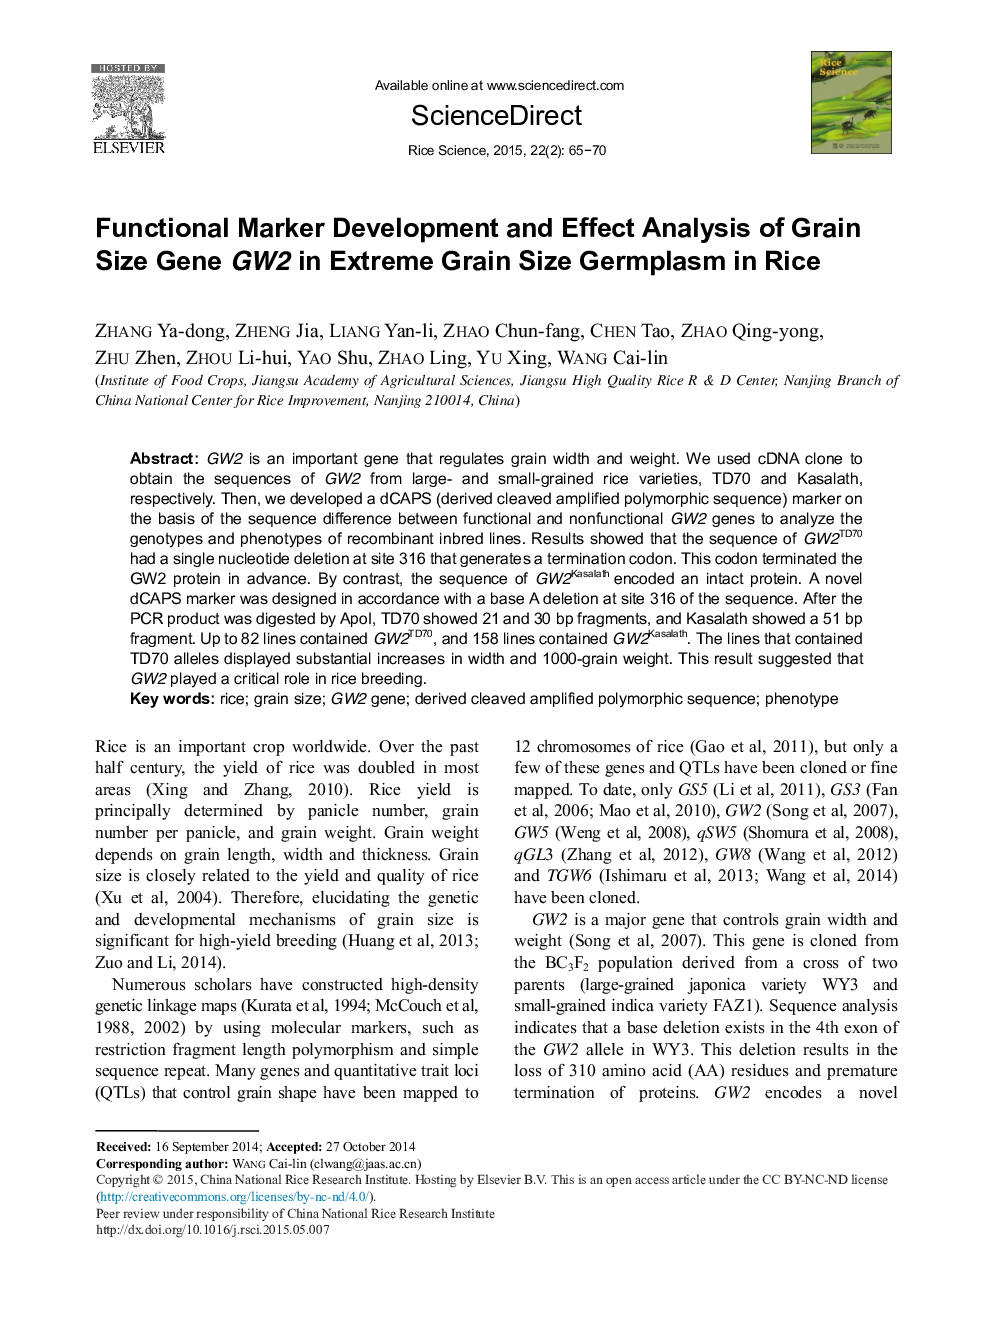 Functional Marker Development and Effect Analysis of Grain Size Gene GW2 in Extreme Grain Size Germplasm in Rice 